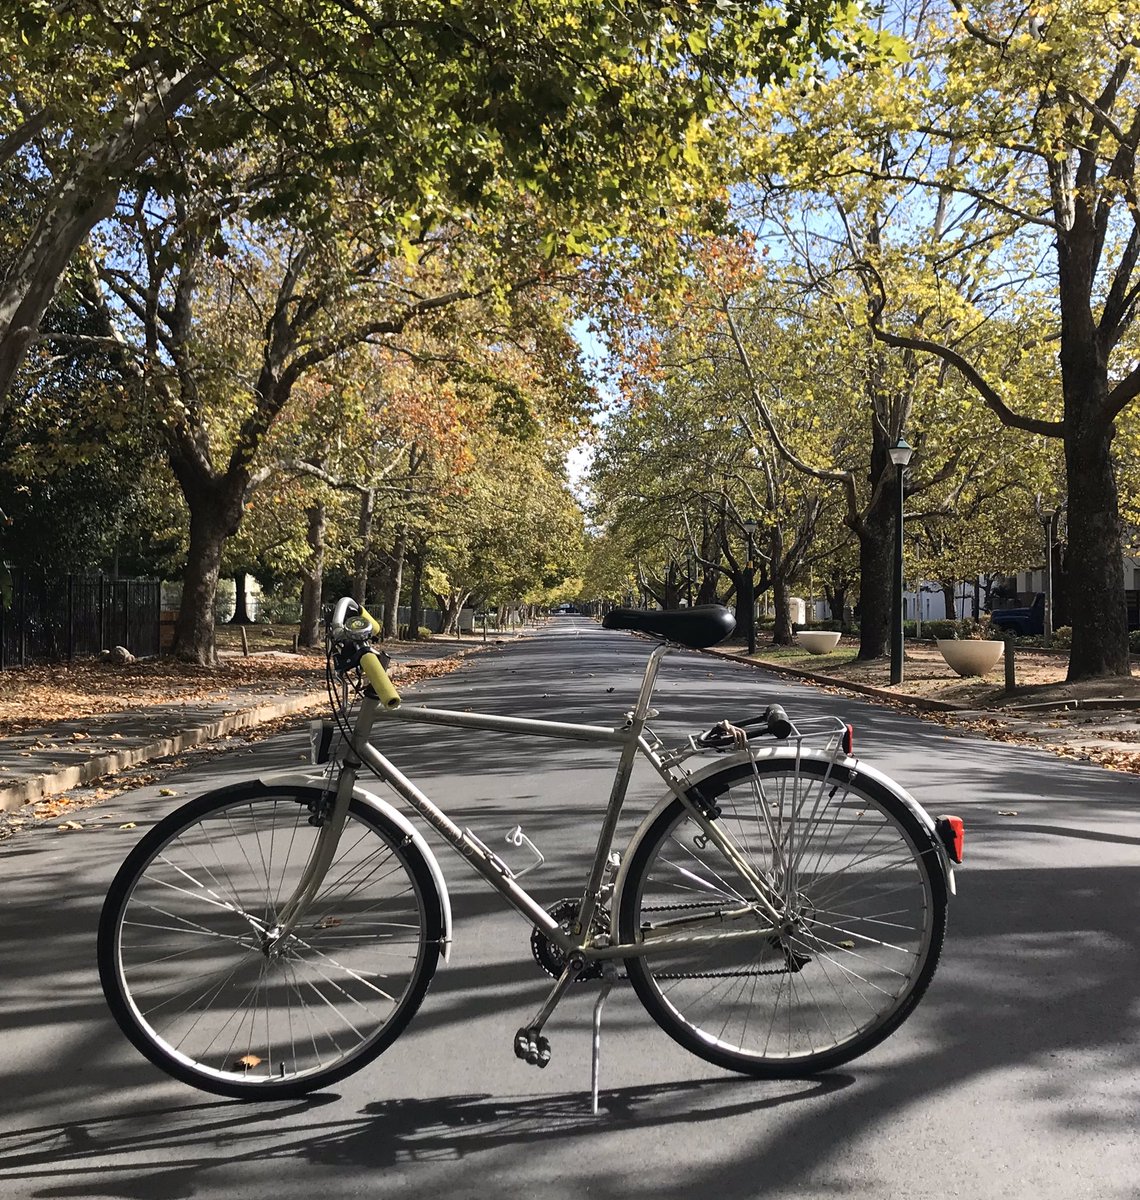 Victoria Street today. Normally the campus would be teeming with students. @StellenboschUni @VisitStellies @matiemedia #cycleStellenbosch